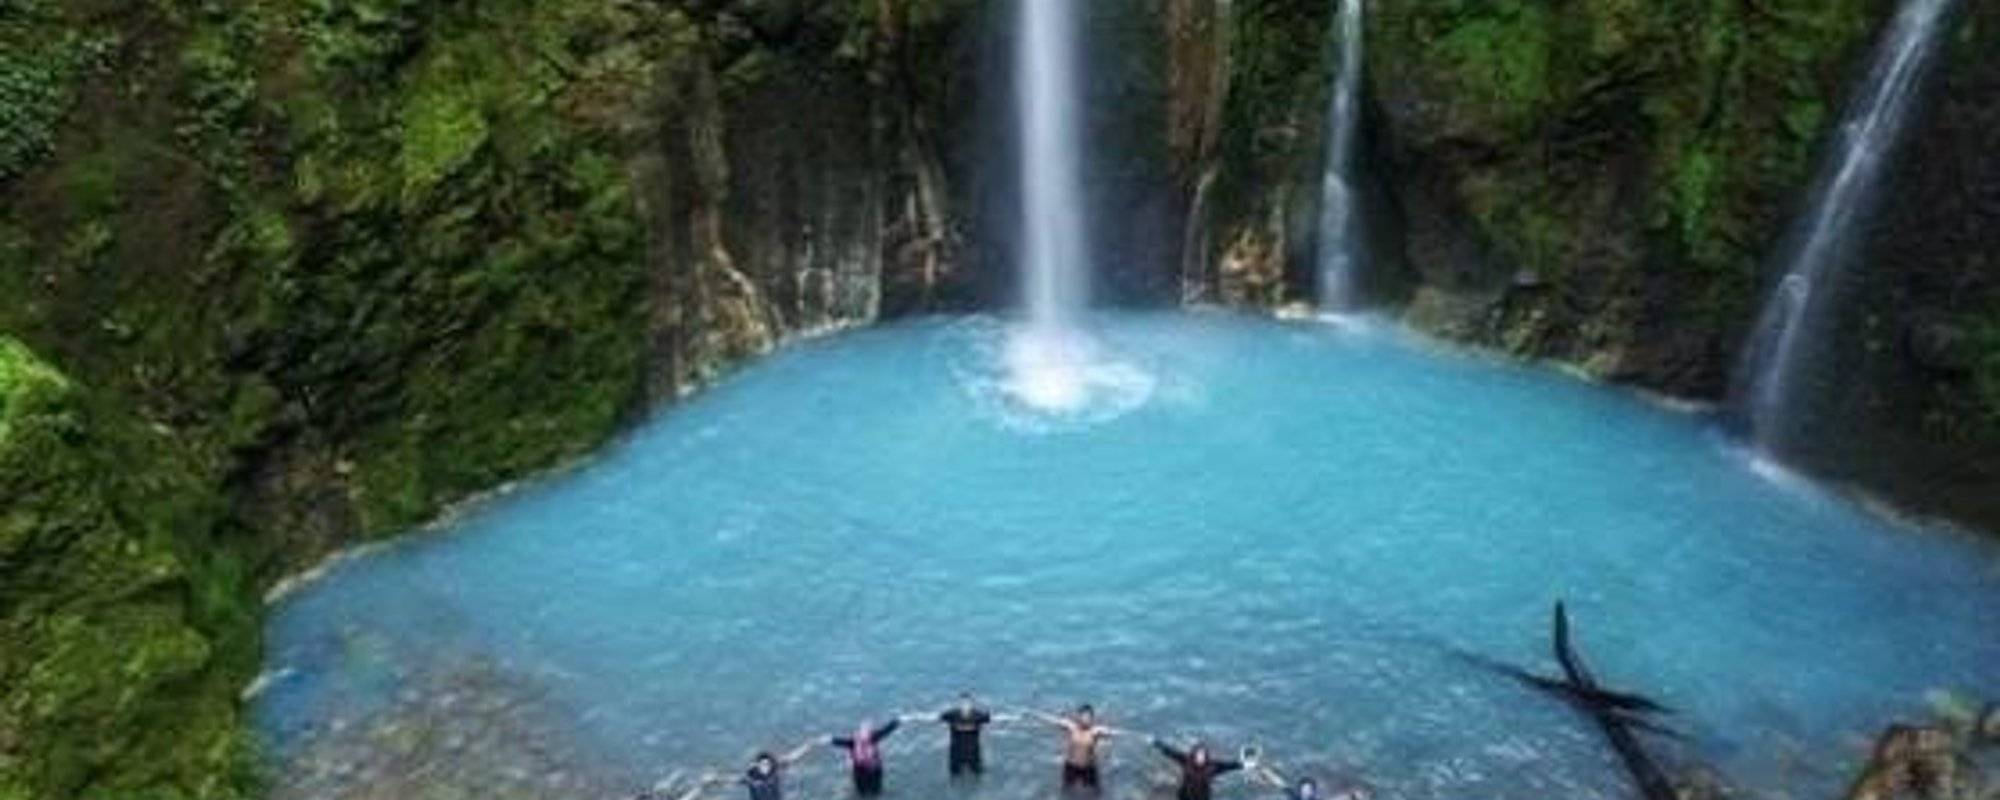 Explore Two Color Waterfall Sibolangit, North Sumatra Indonesia